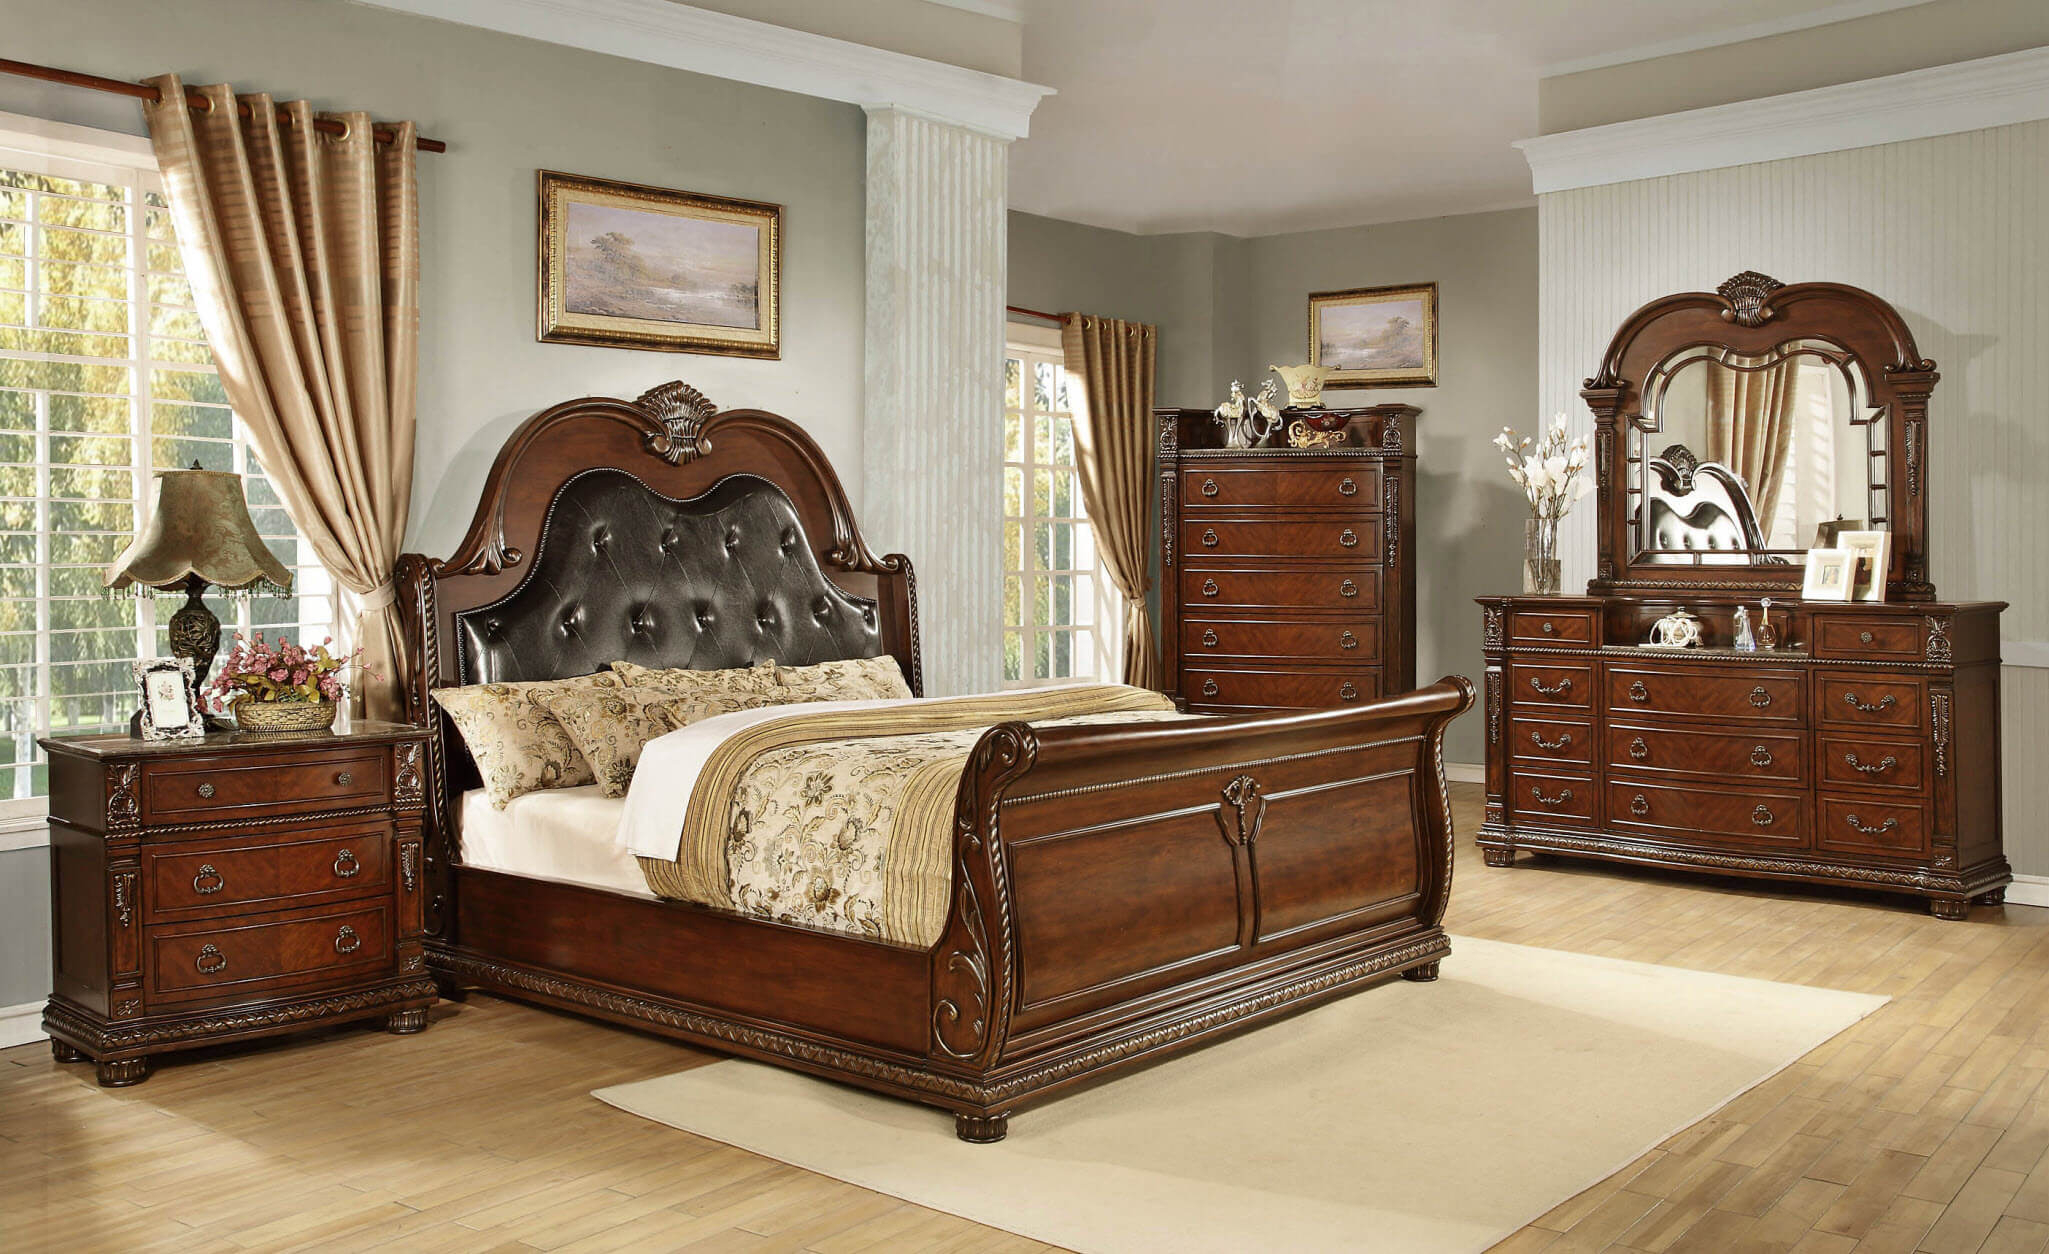 B718 Palace Marble Top Bedroom Set Global Trading with proportions 2049 X 1254